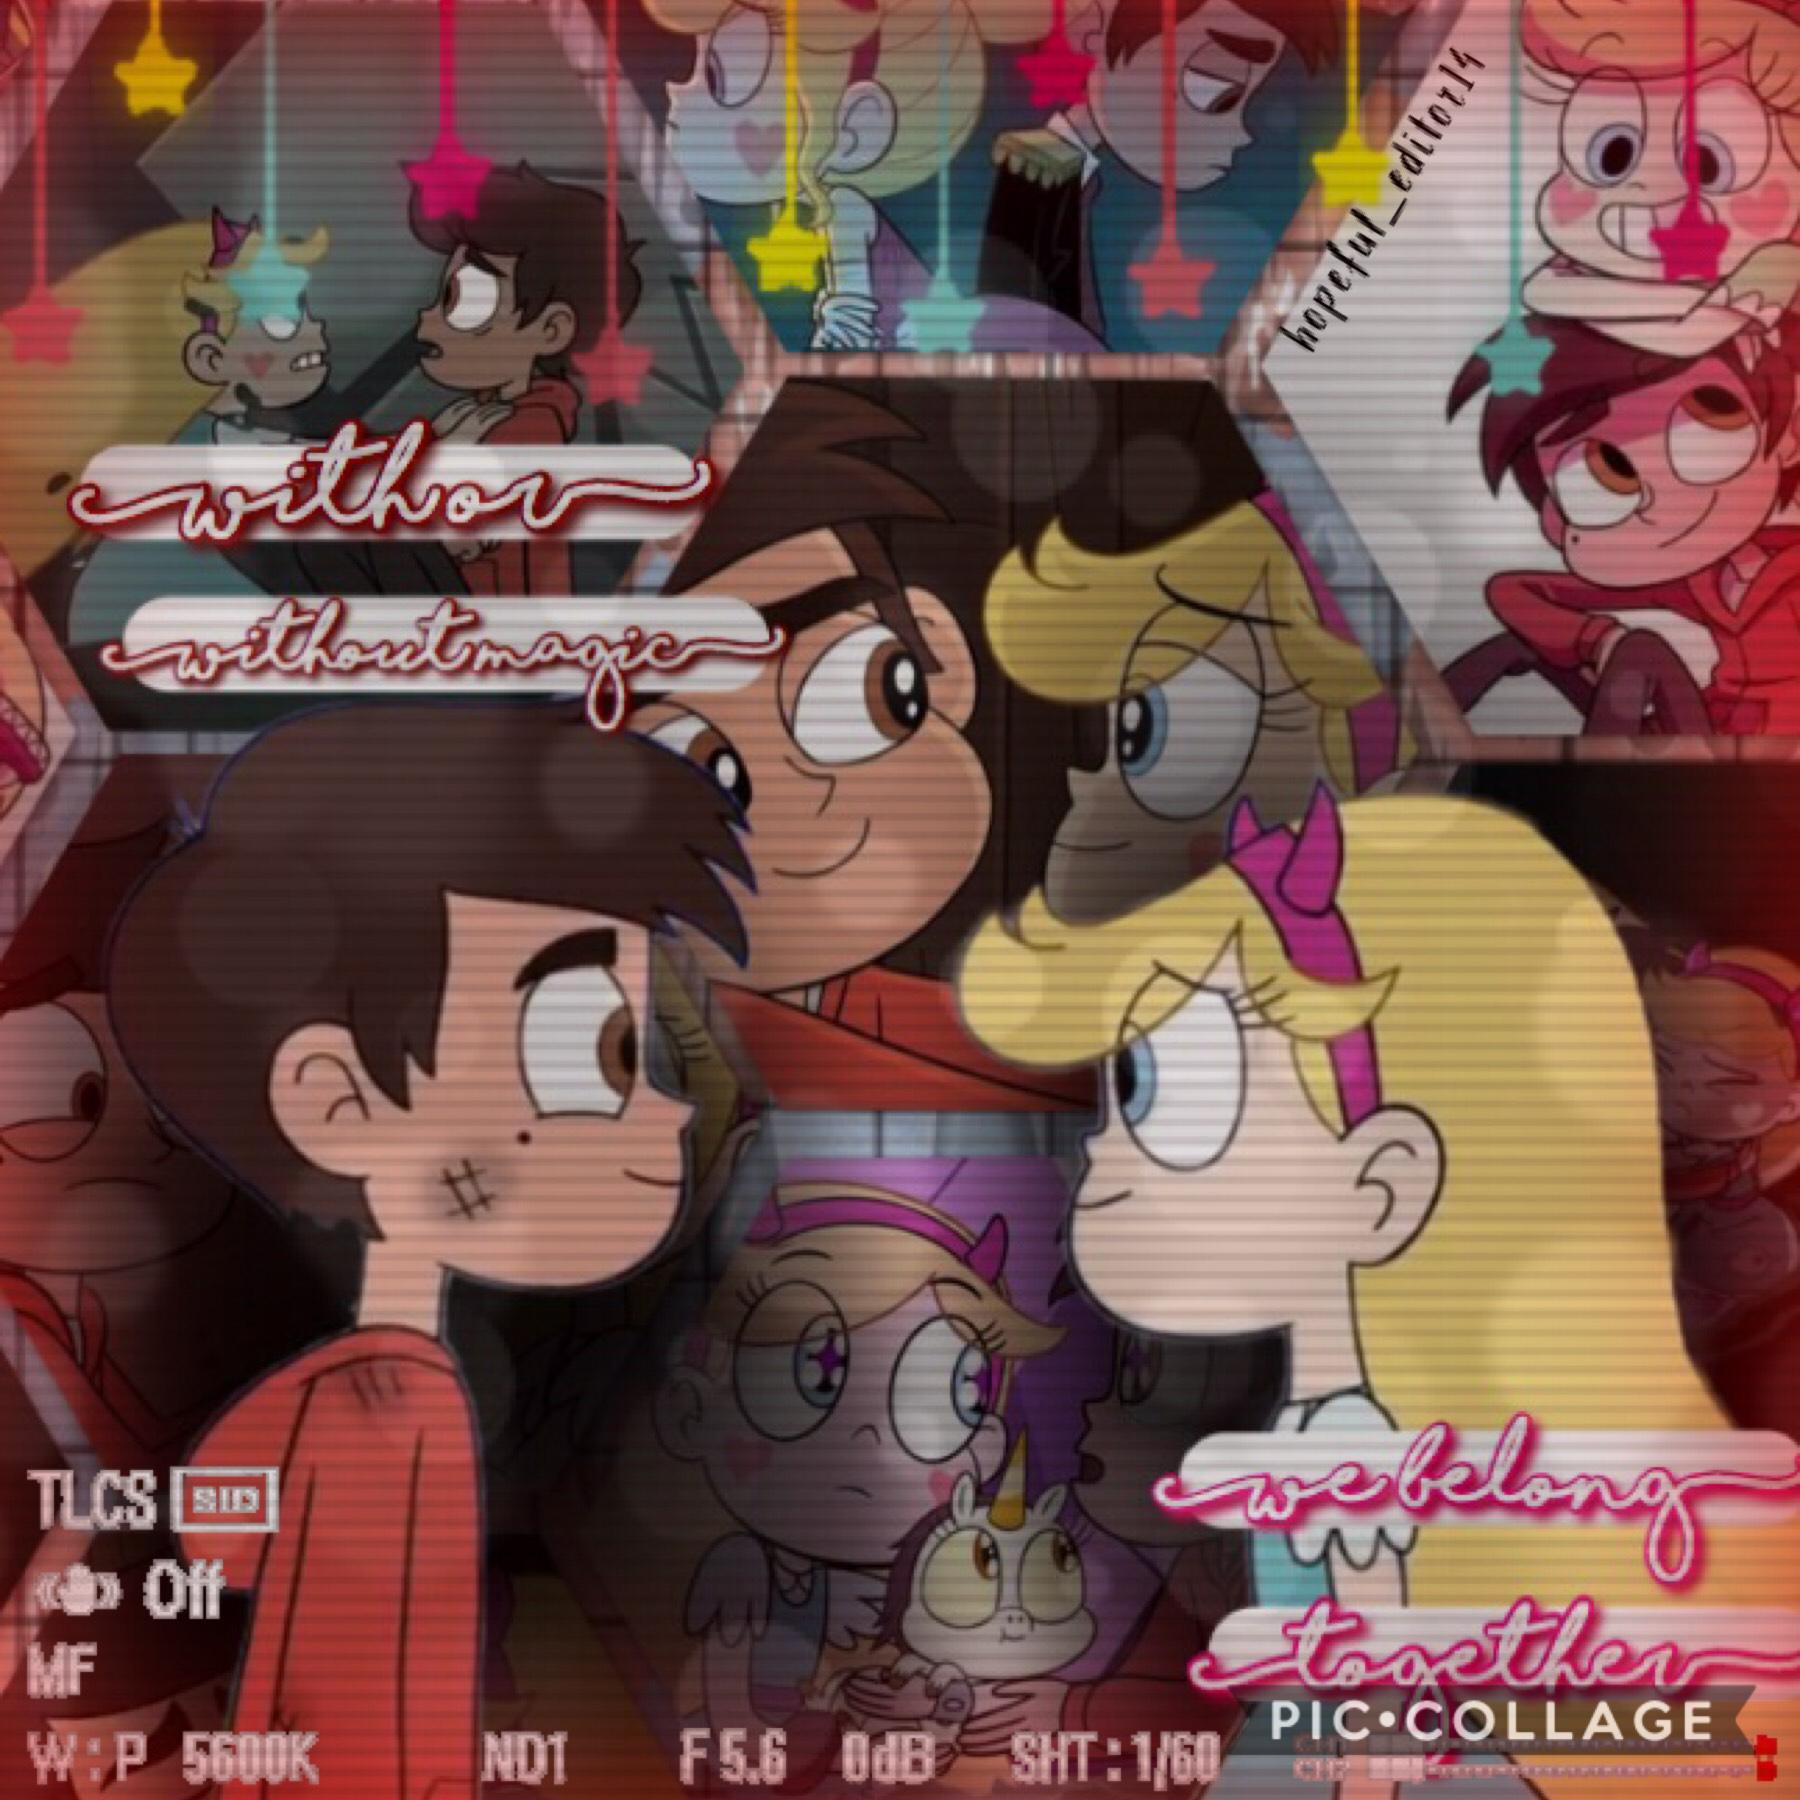 TAP
STARCO
who else watched the star finale yesterday? I don’t want it to be over!